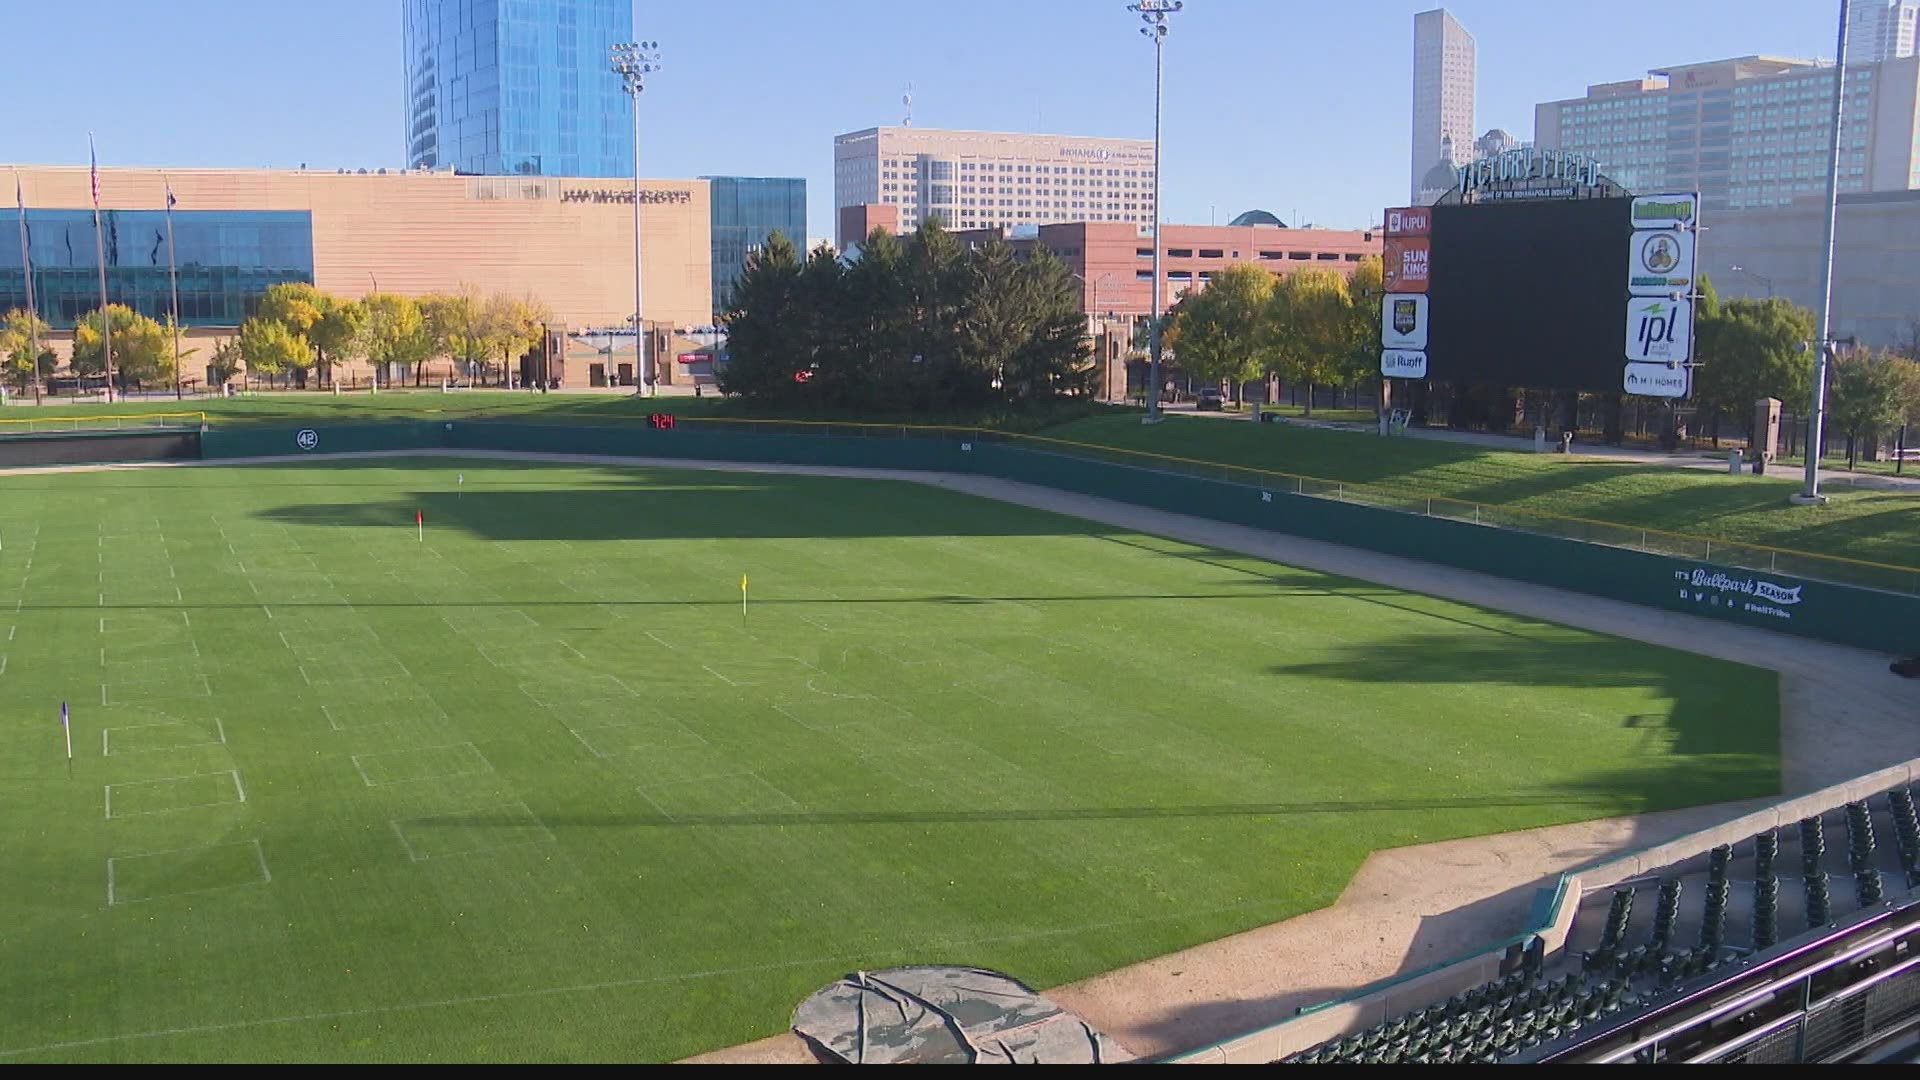 Victory Field has hosted a car show, sold-out movie nights, 9-hole golf course and more during the coronavirus pandemic.